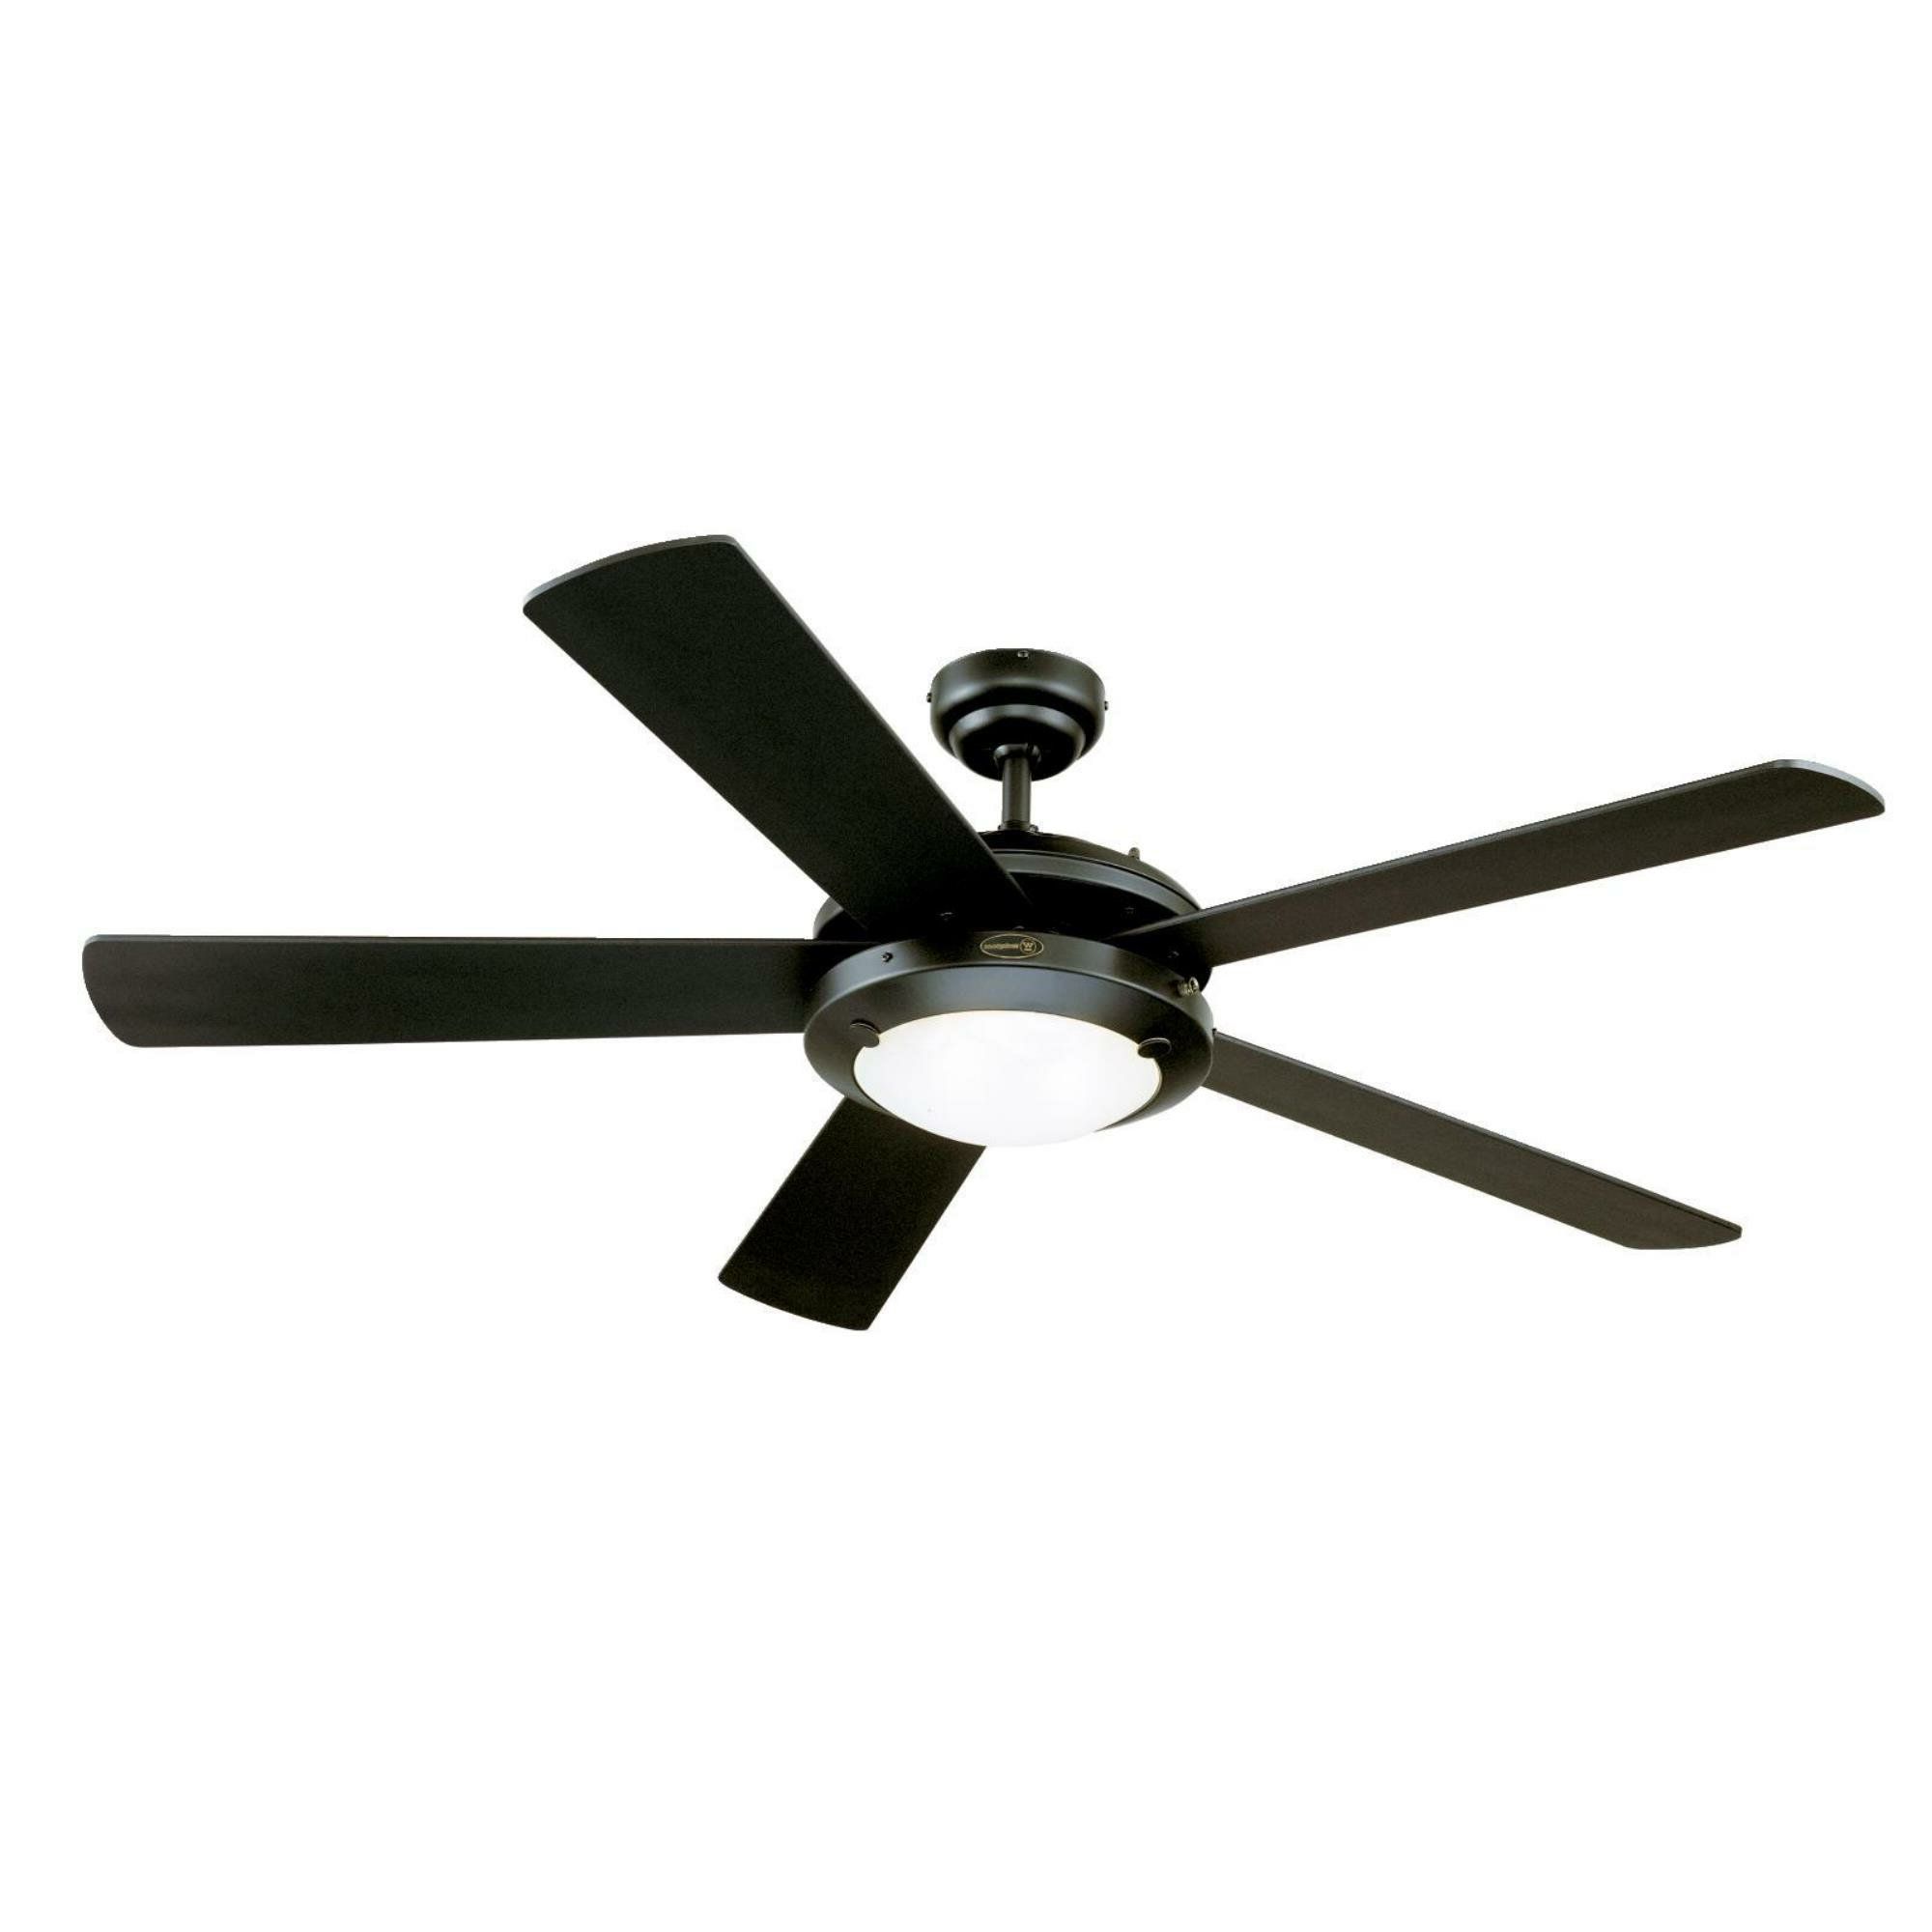 Well Liked Creslow 5 Blade Ceiling Fans Within 52" Creslow 5 Blade Ceiling Fan, Light Kit Included (View 2 of 20)